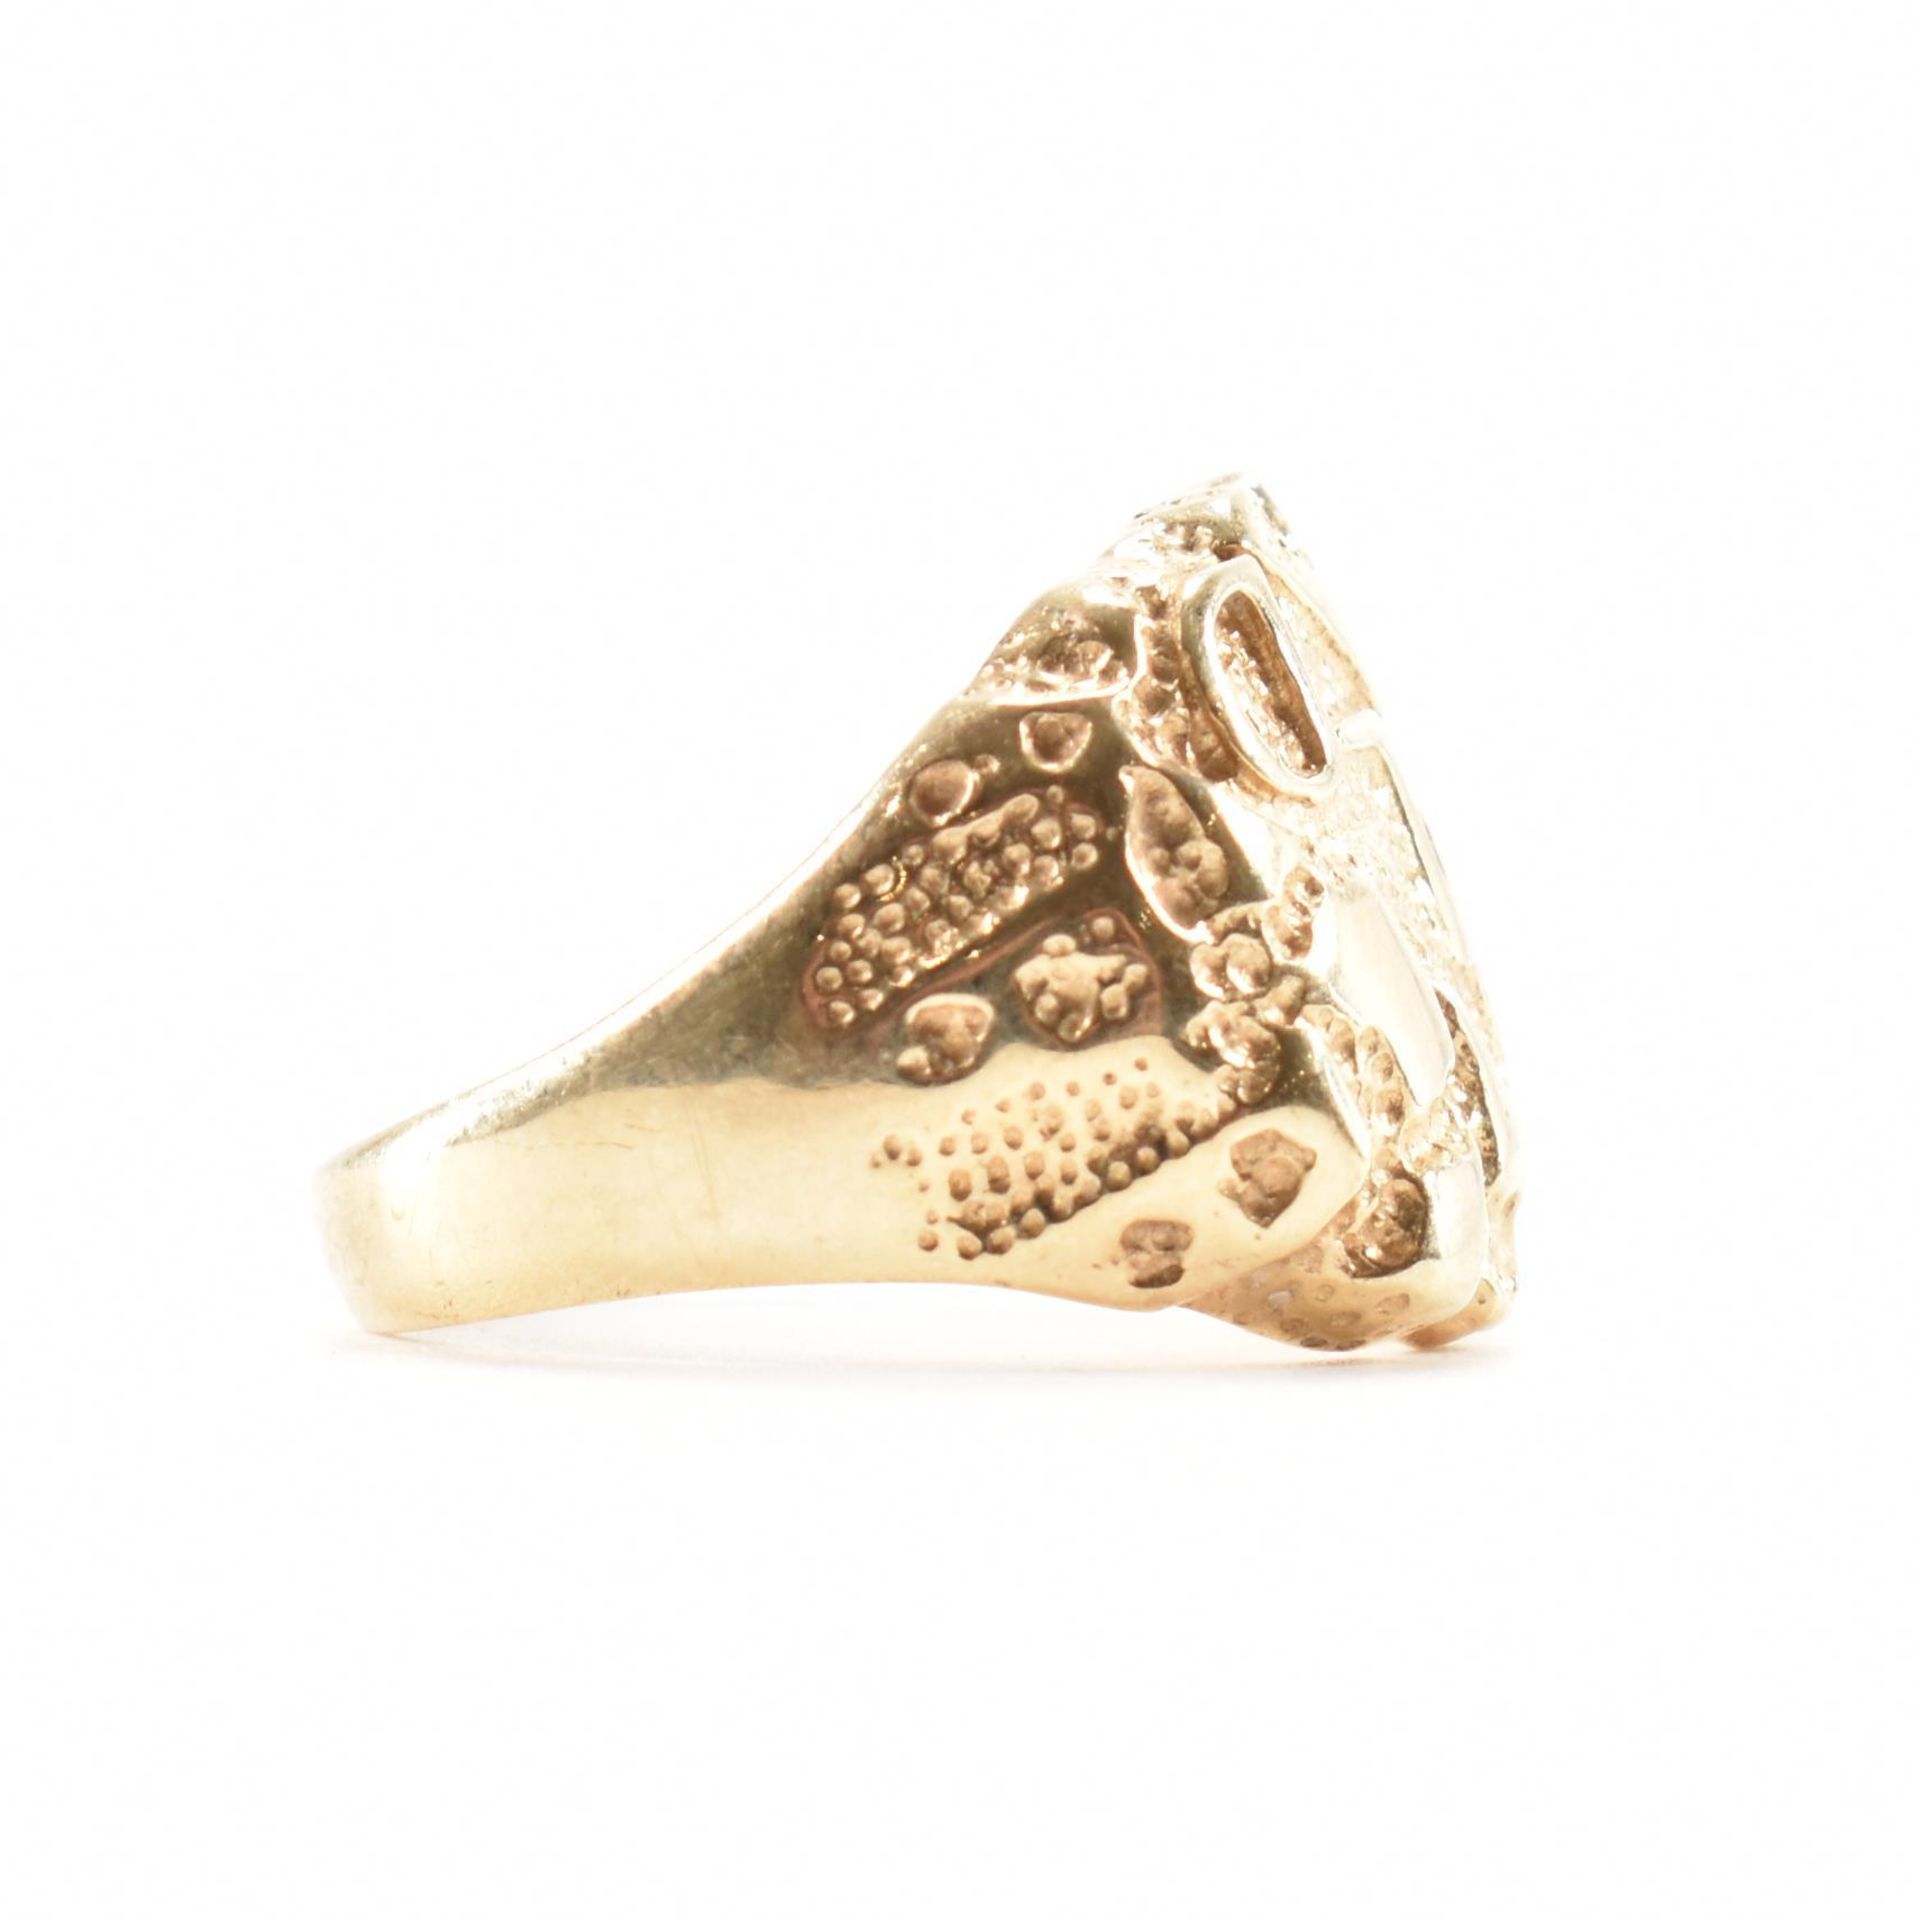 HALLMARKED 9CT GOLD NUGGET RING - Image 5 of 9